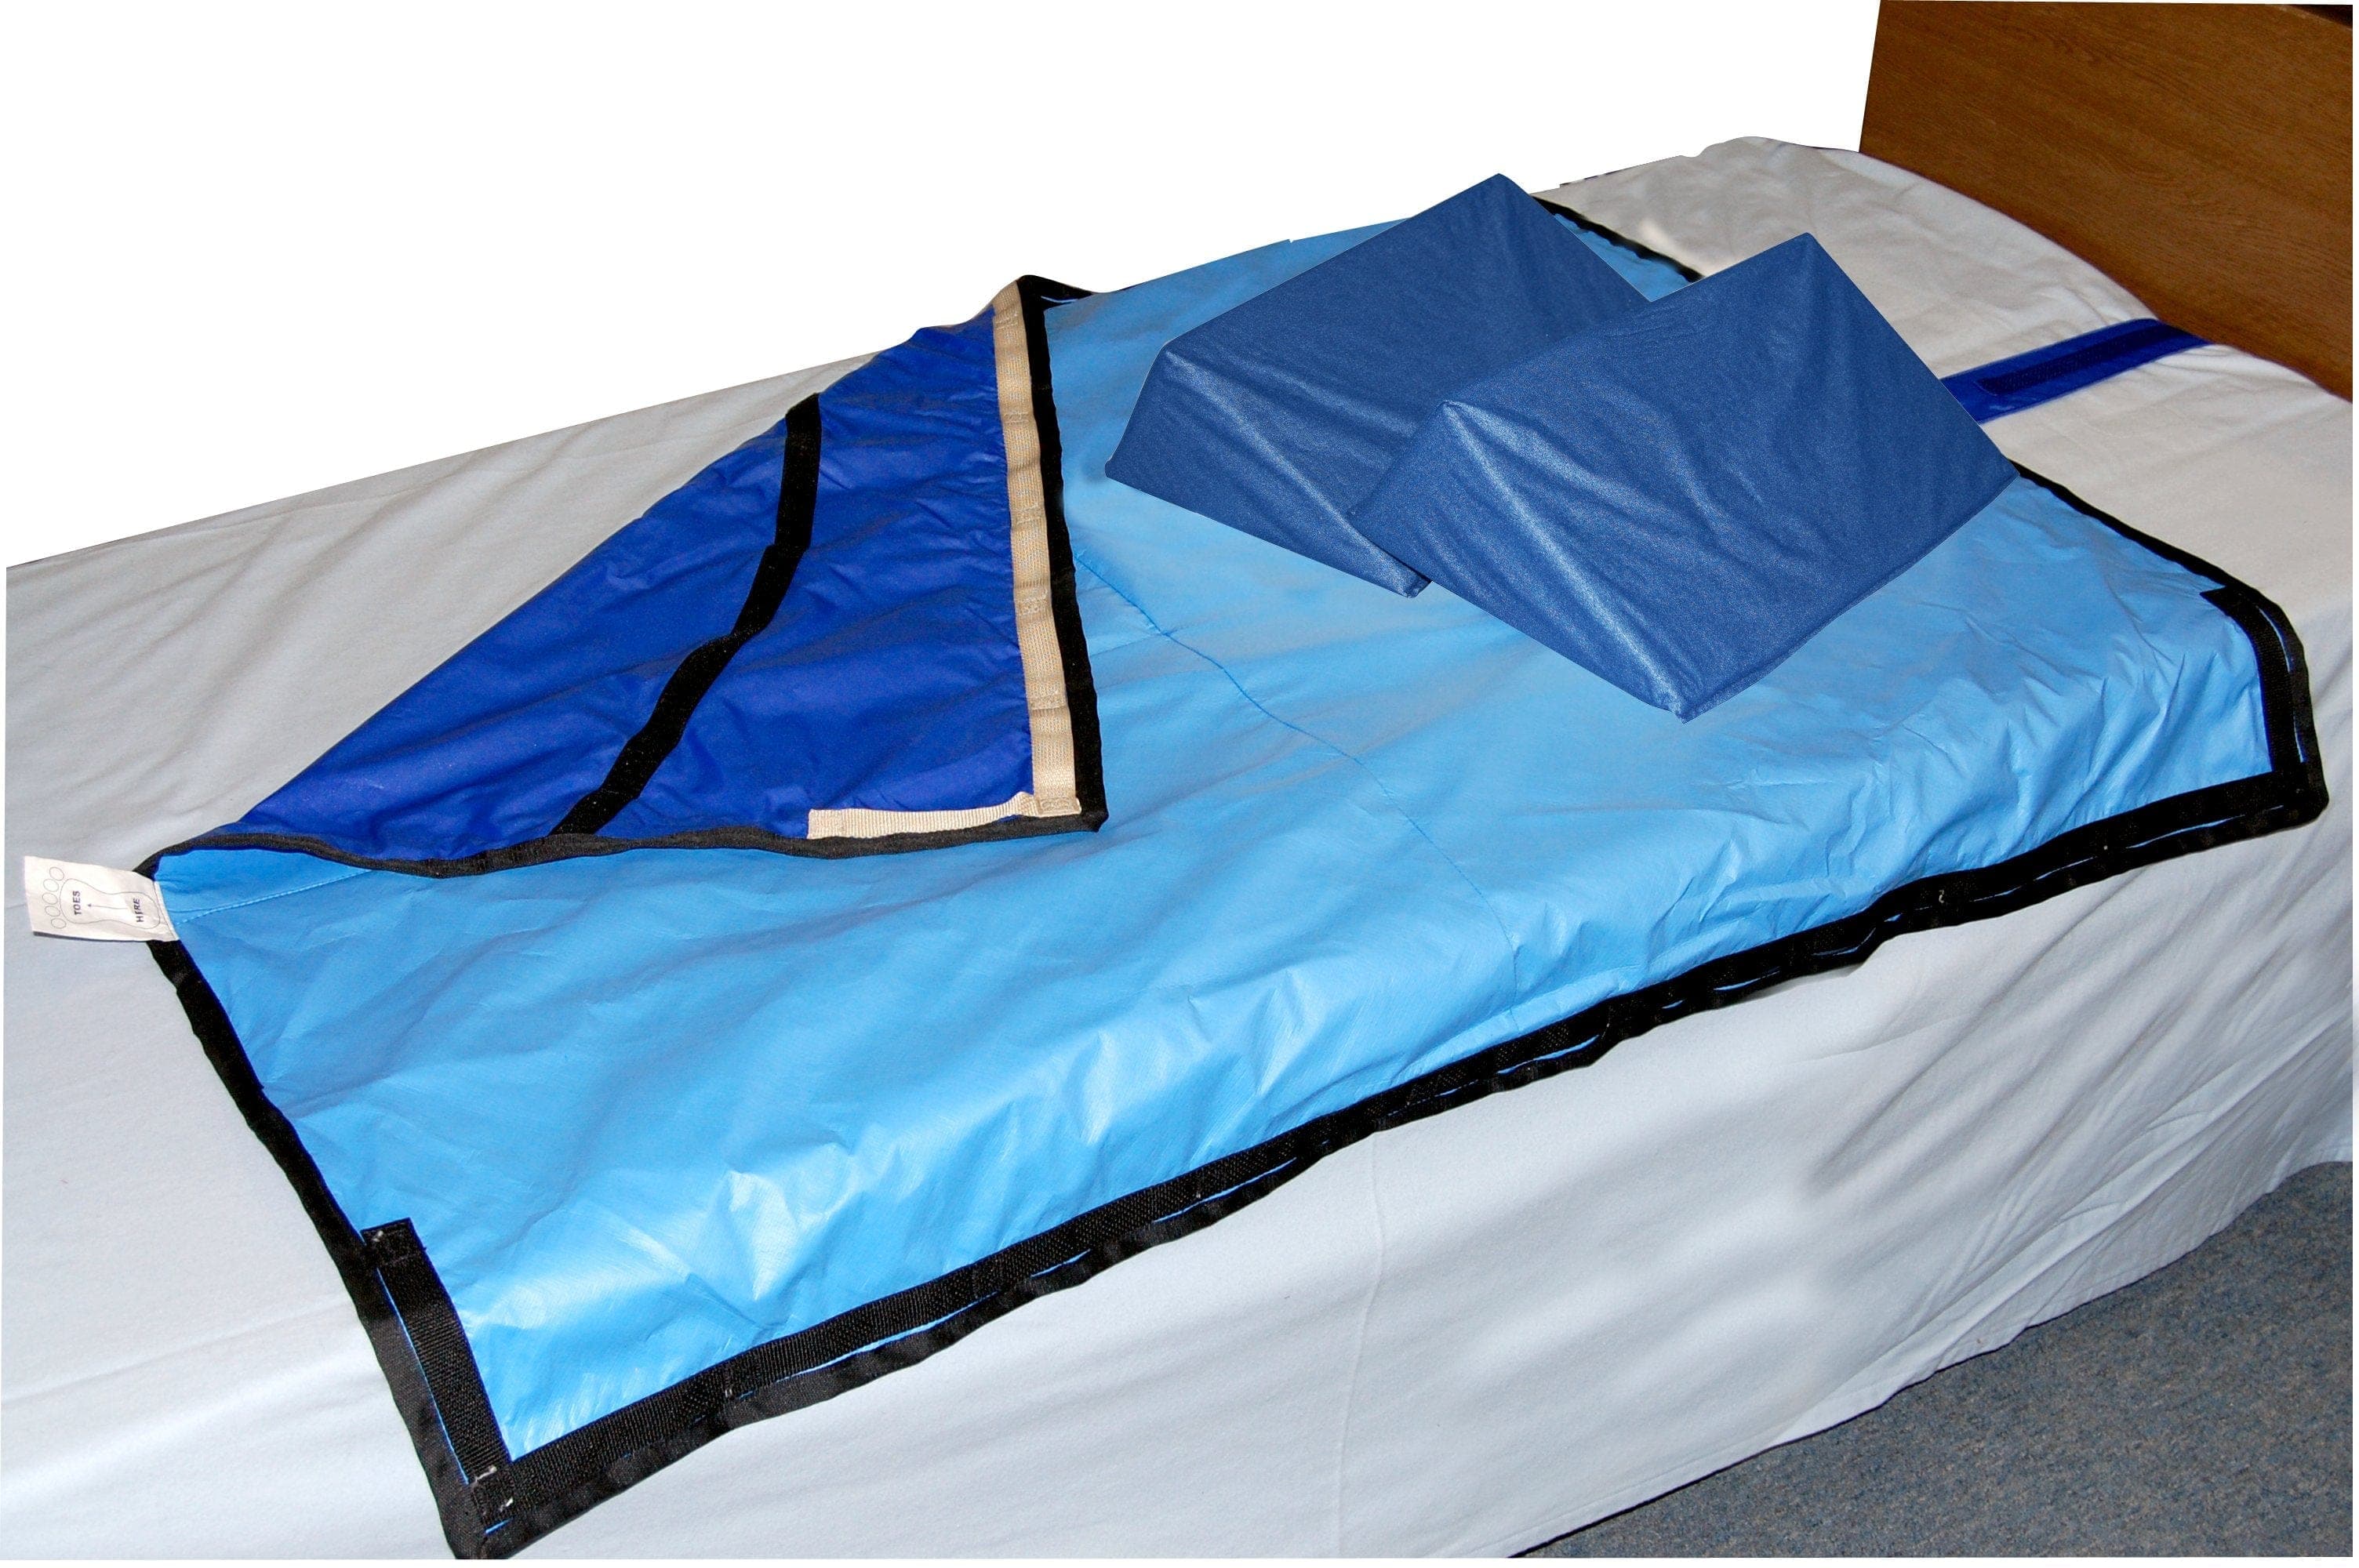 SkilCare Bed Positioning SkilCare 30-Degree Bed System with 50x38" Nylon Sheet & Two 16" Wedges